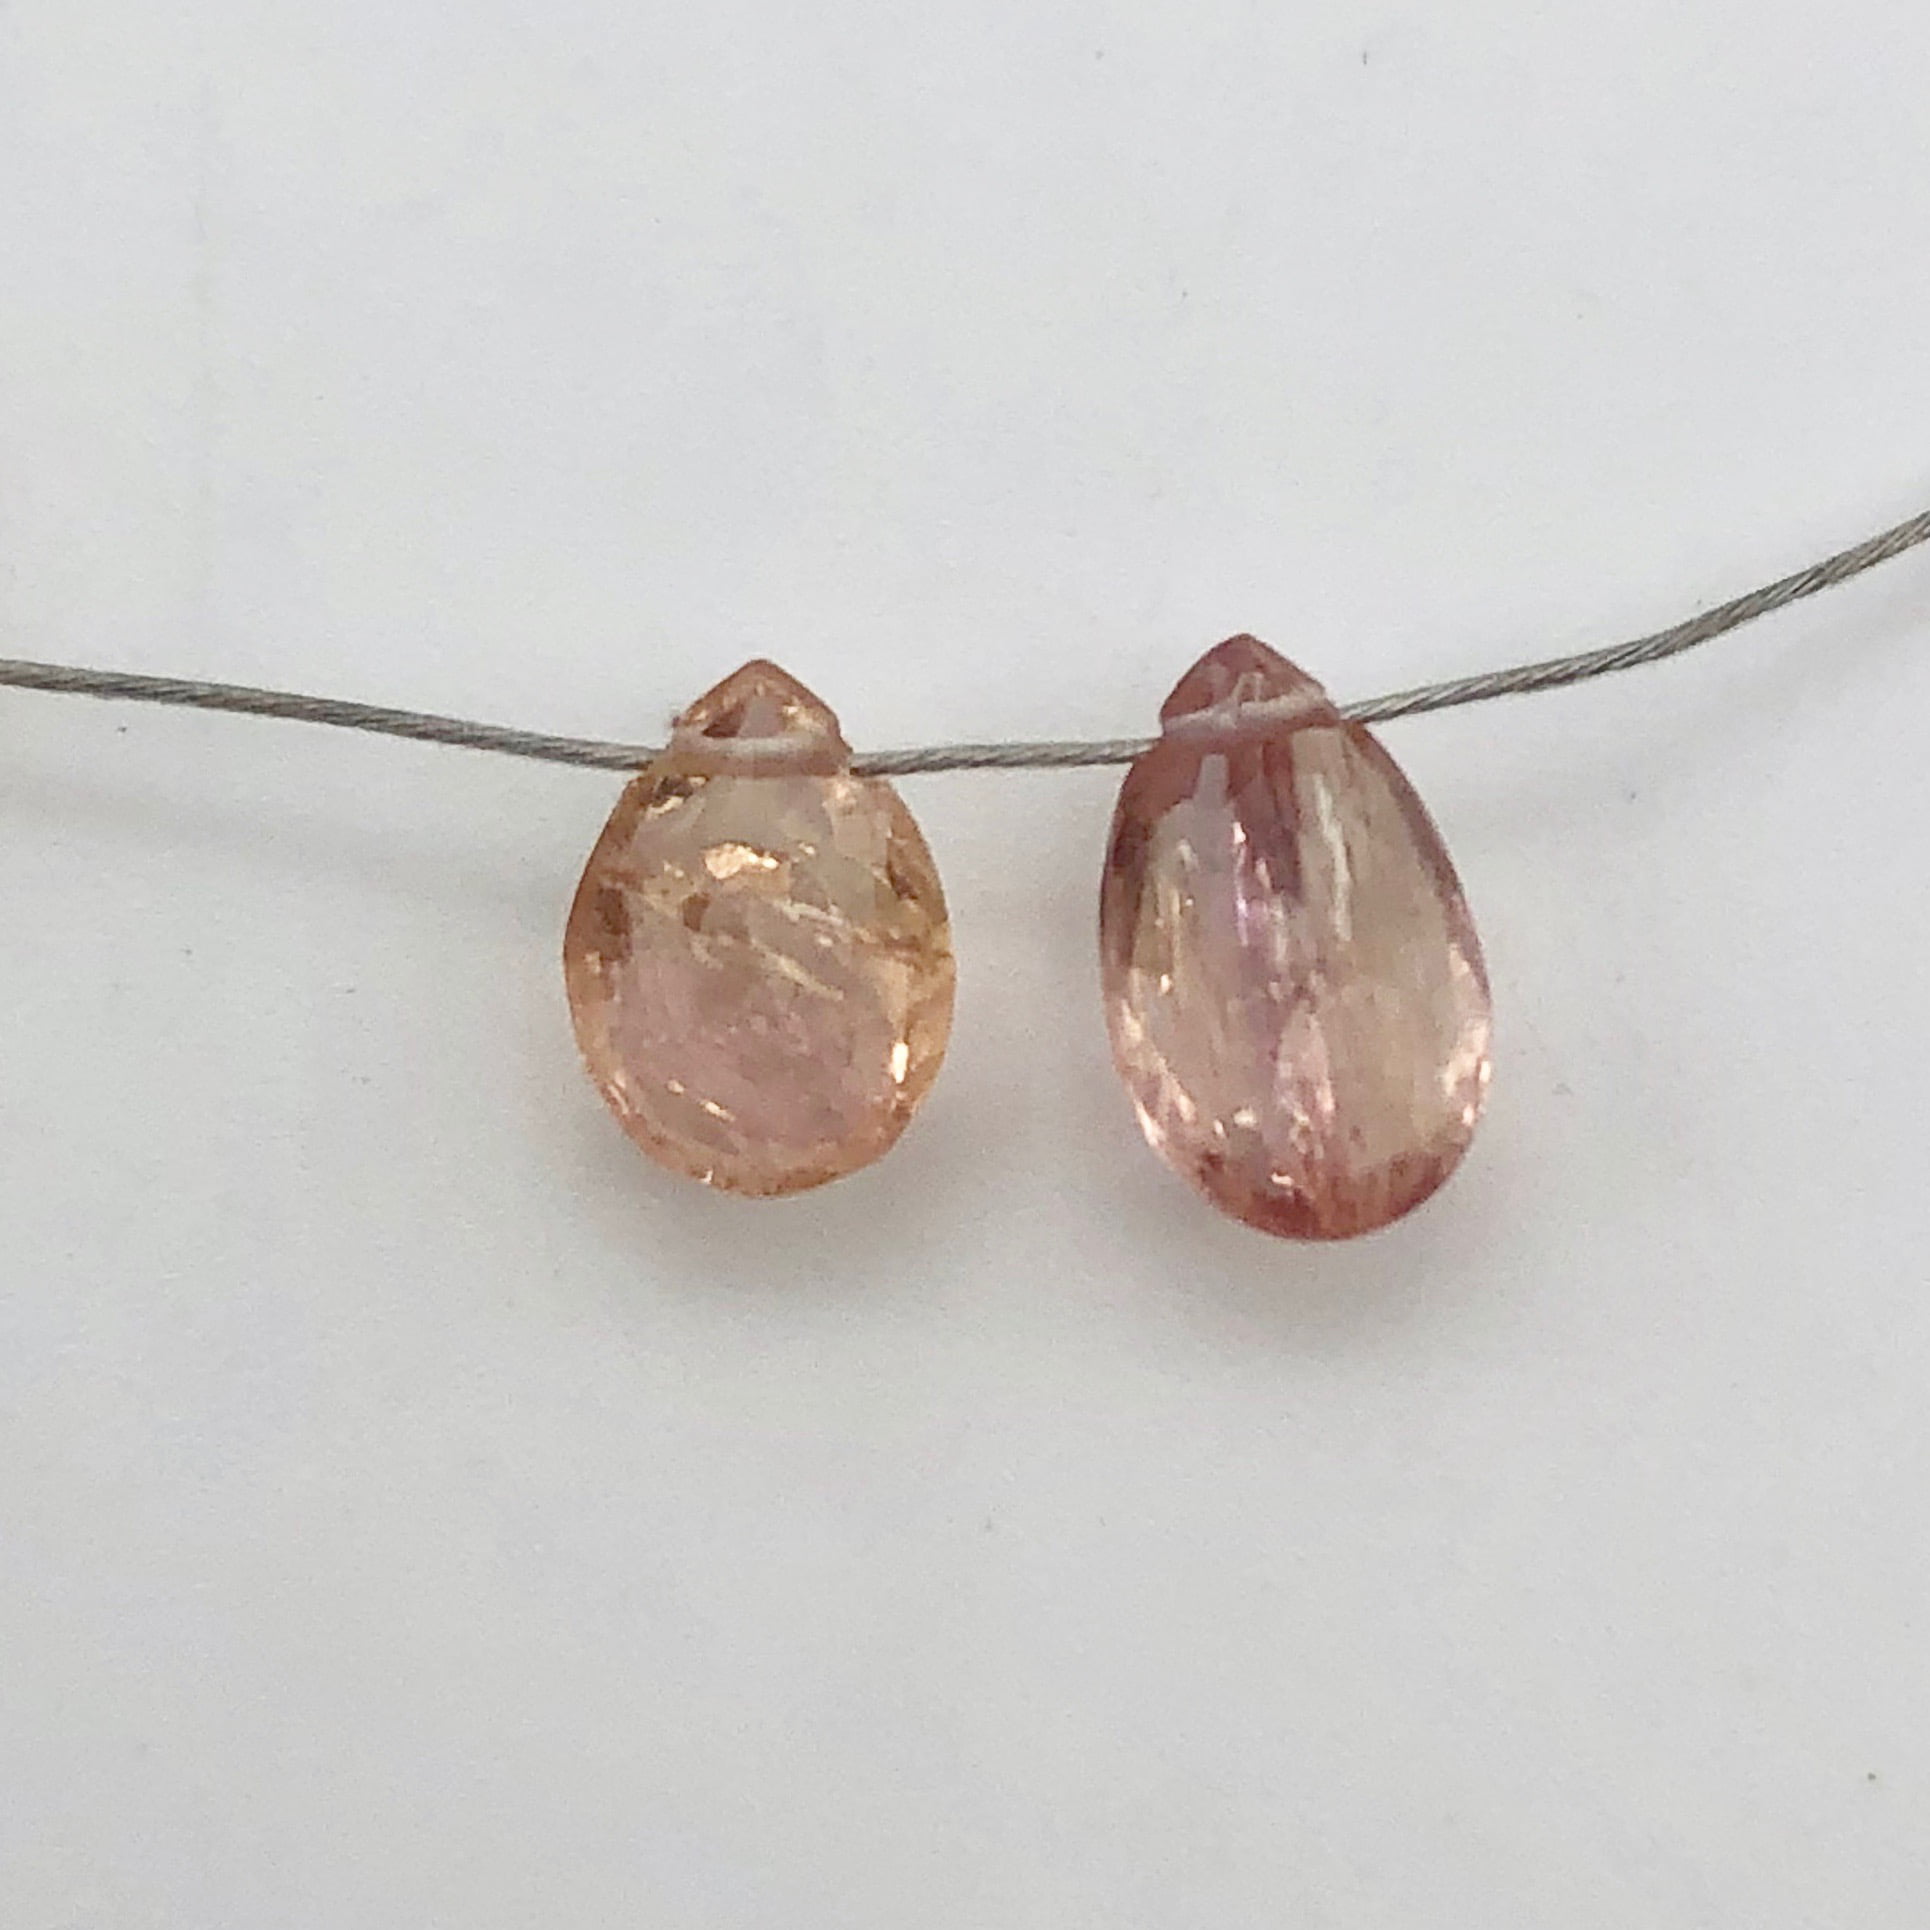 Natural Imperial Topaz~Hand Carved Pear Beads Briolettes~17mmx10mm-14mmx10mm~Imperial Topaz Carving Pear Both Side Carving